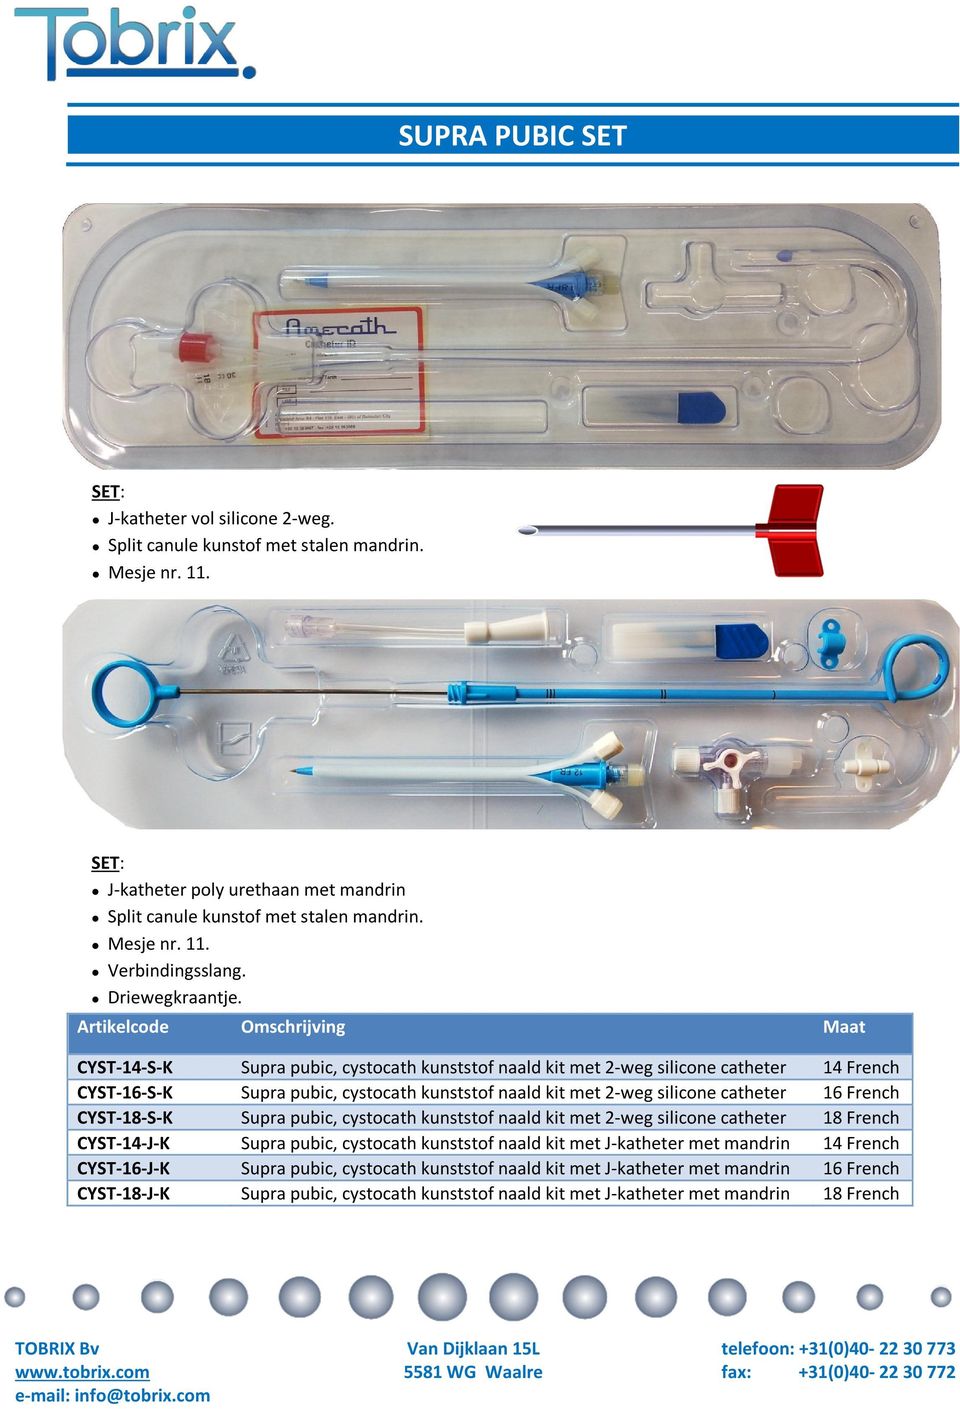 CYST-14-S-K Supra pubic, cystocath kunststof naald kit met 2-weg silicone catheter 14 French CYST-16-S-K Supra pubic, cystocath kunststof naald kit met 2-weg silicone catheter 16 French CYST-18-S-K